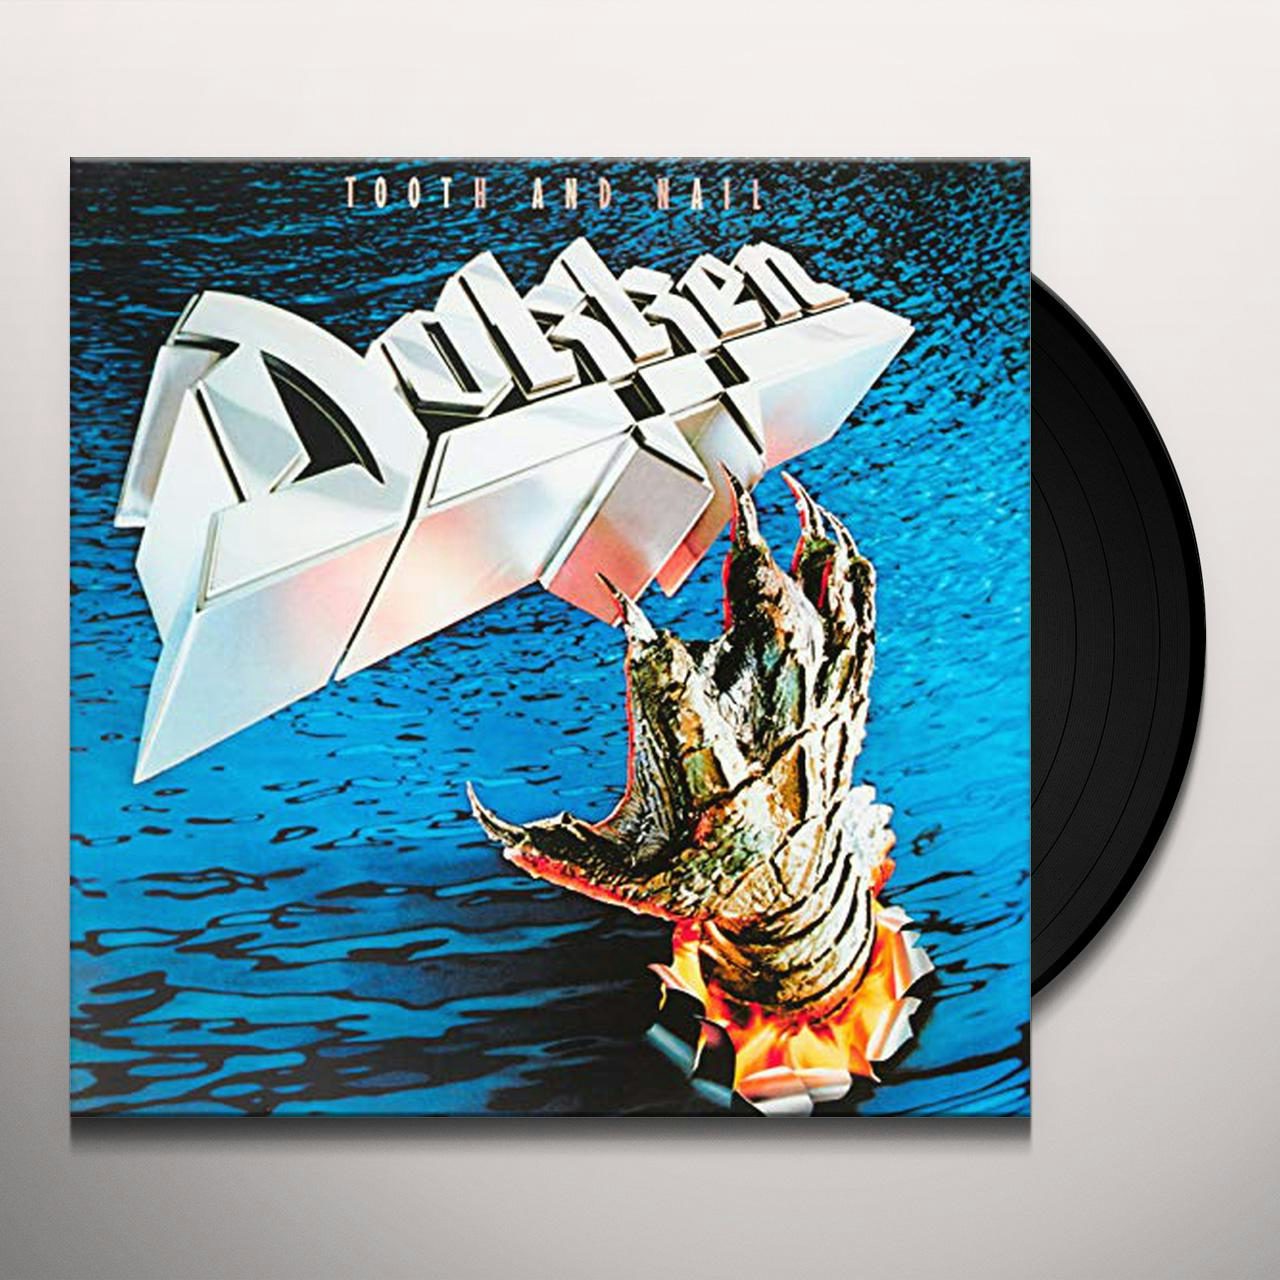 Tooth And Nail Vinyl Record - Dokken